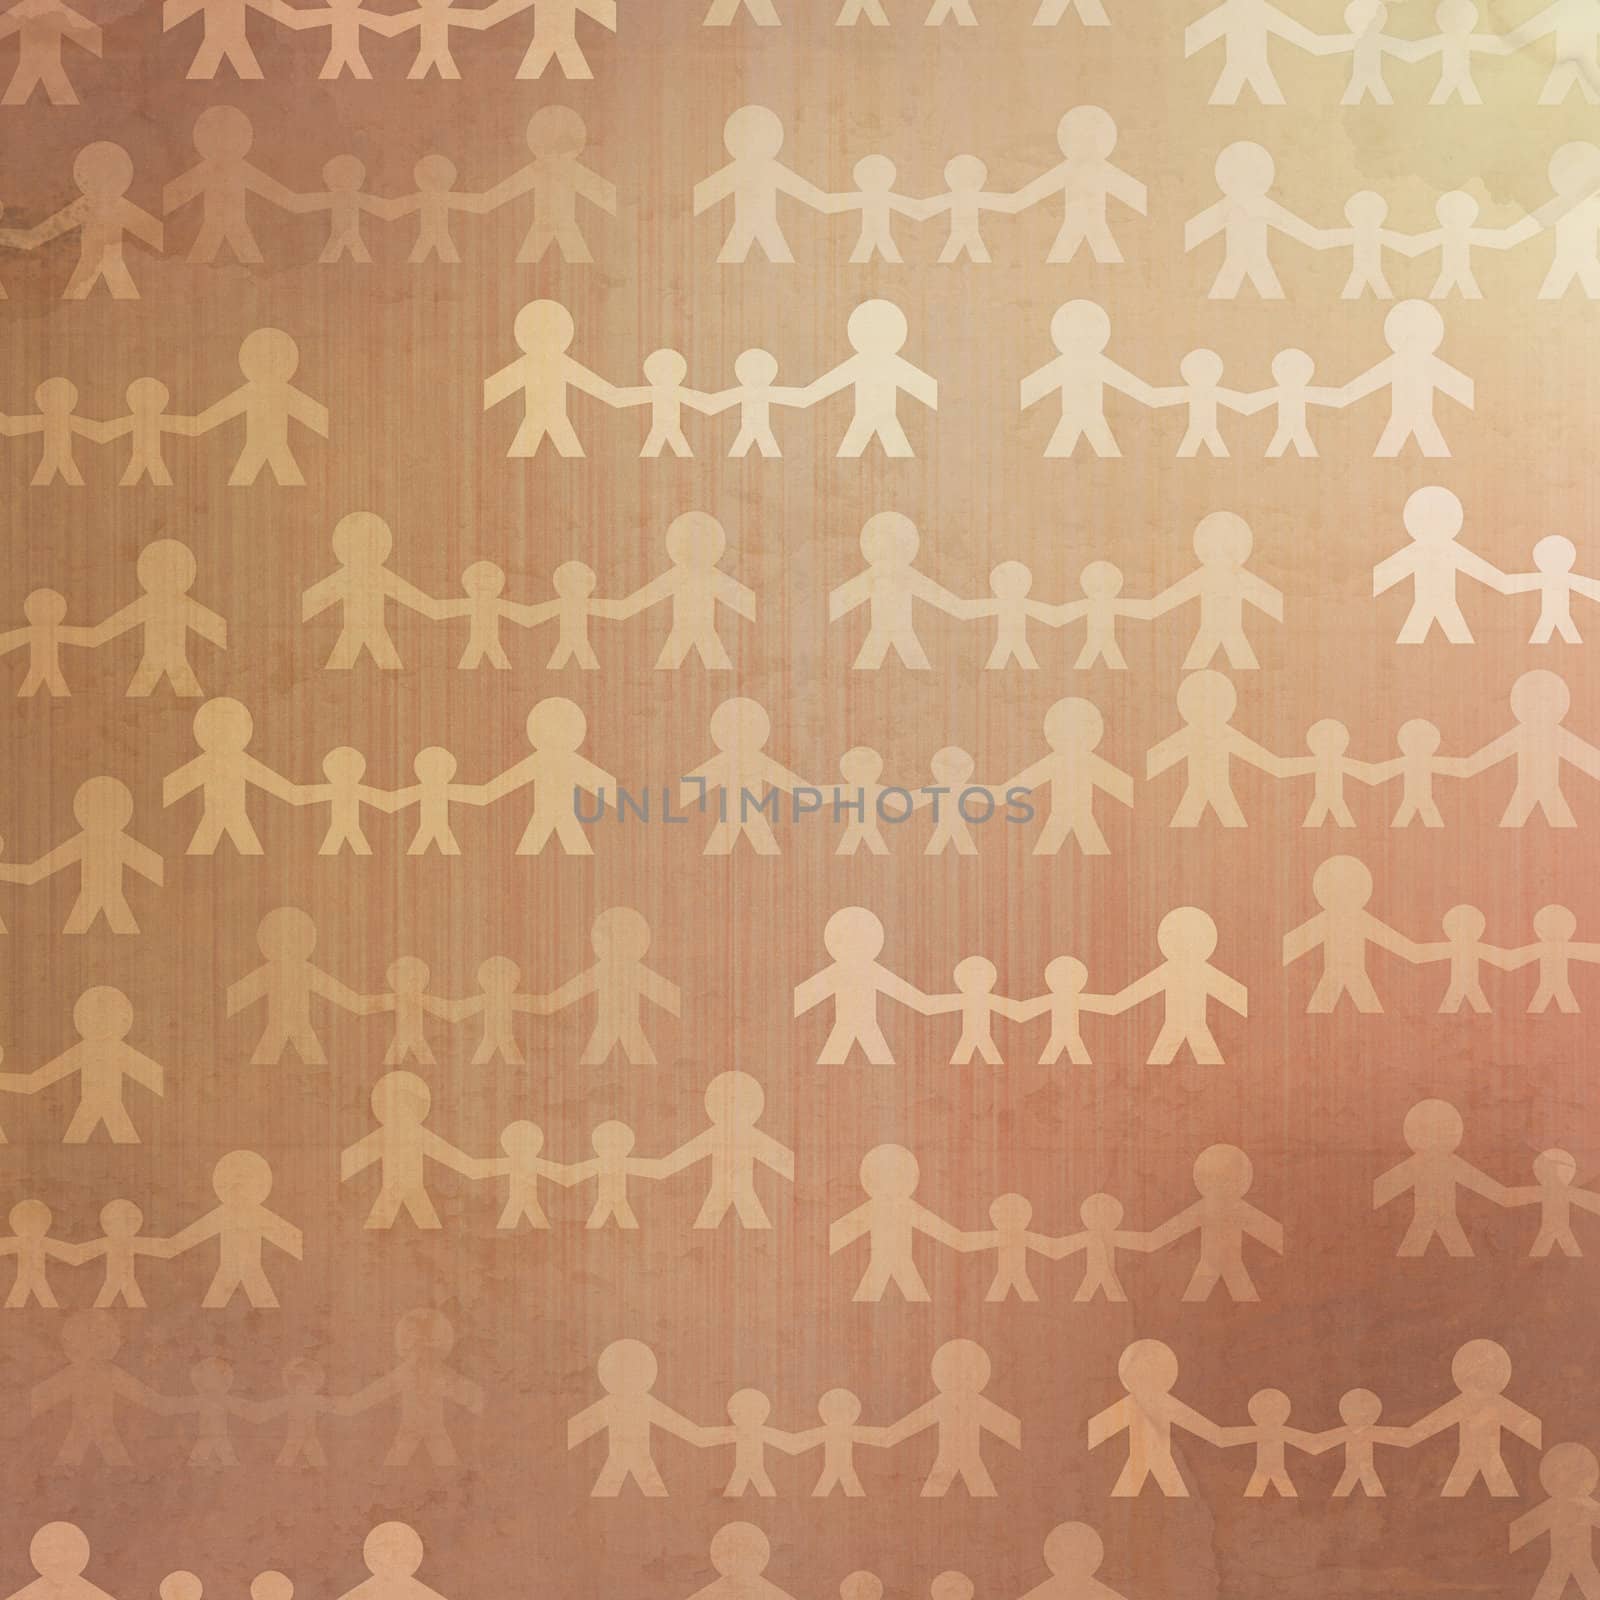 Grunge family abstract vintage background and pattern